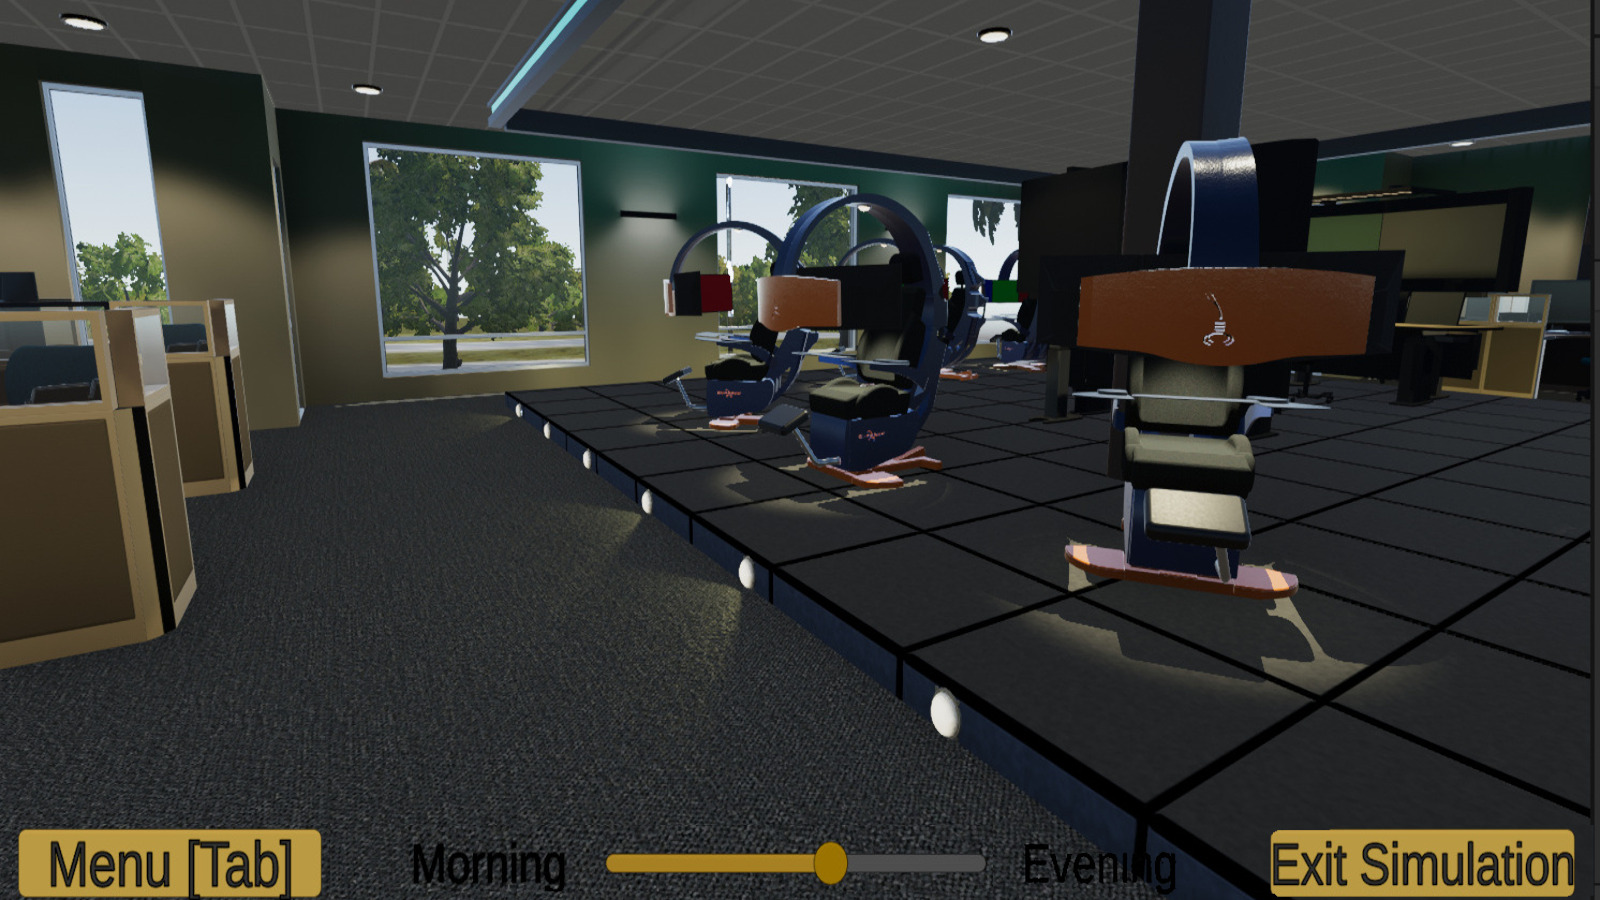 Screen capture from interactive 3D simulation of an advanced industrial control room. The image shows multiple high-tech workstations with a curving arch that emerges from the back of the seat and suspends several computer screens in view of the operator. On-screen widgets allow the user of the interactive app to set the time of day in order to accurately observe the incident sunlight in the room.